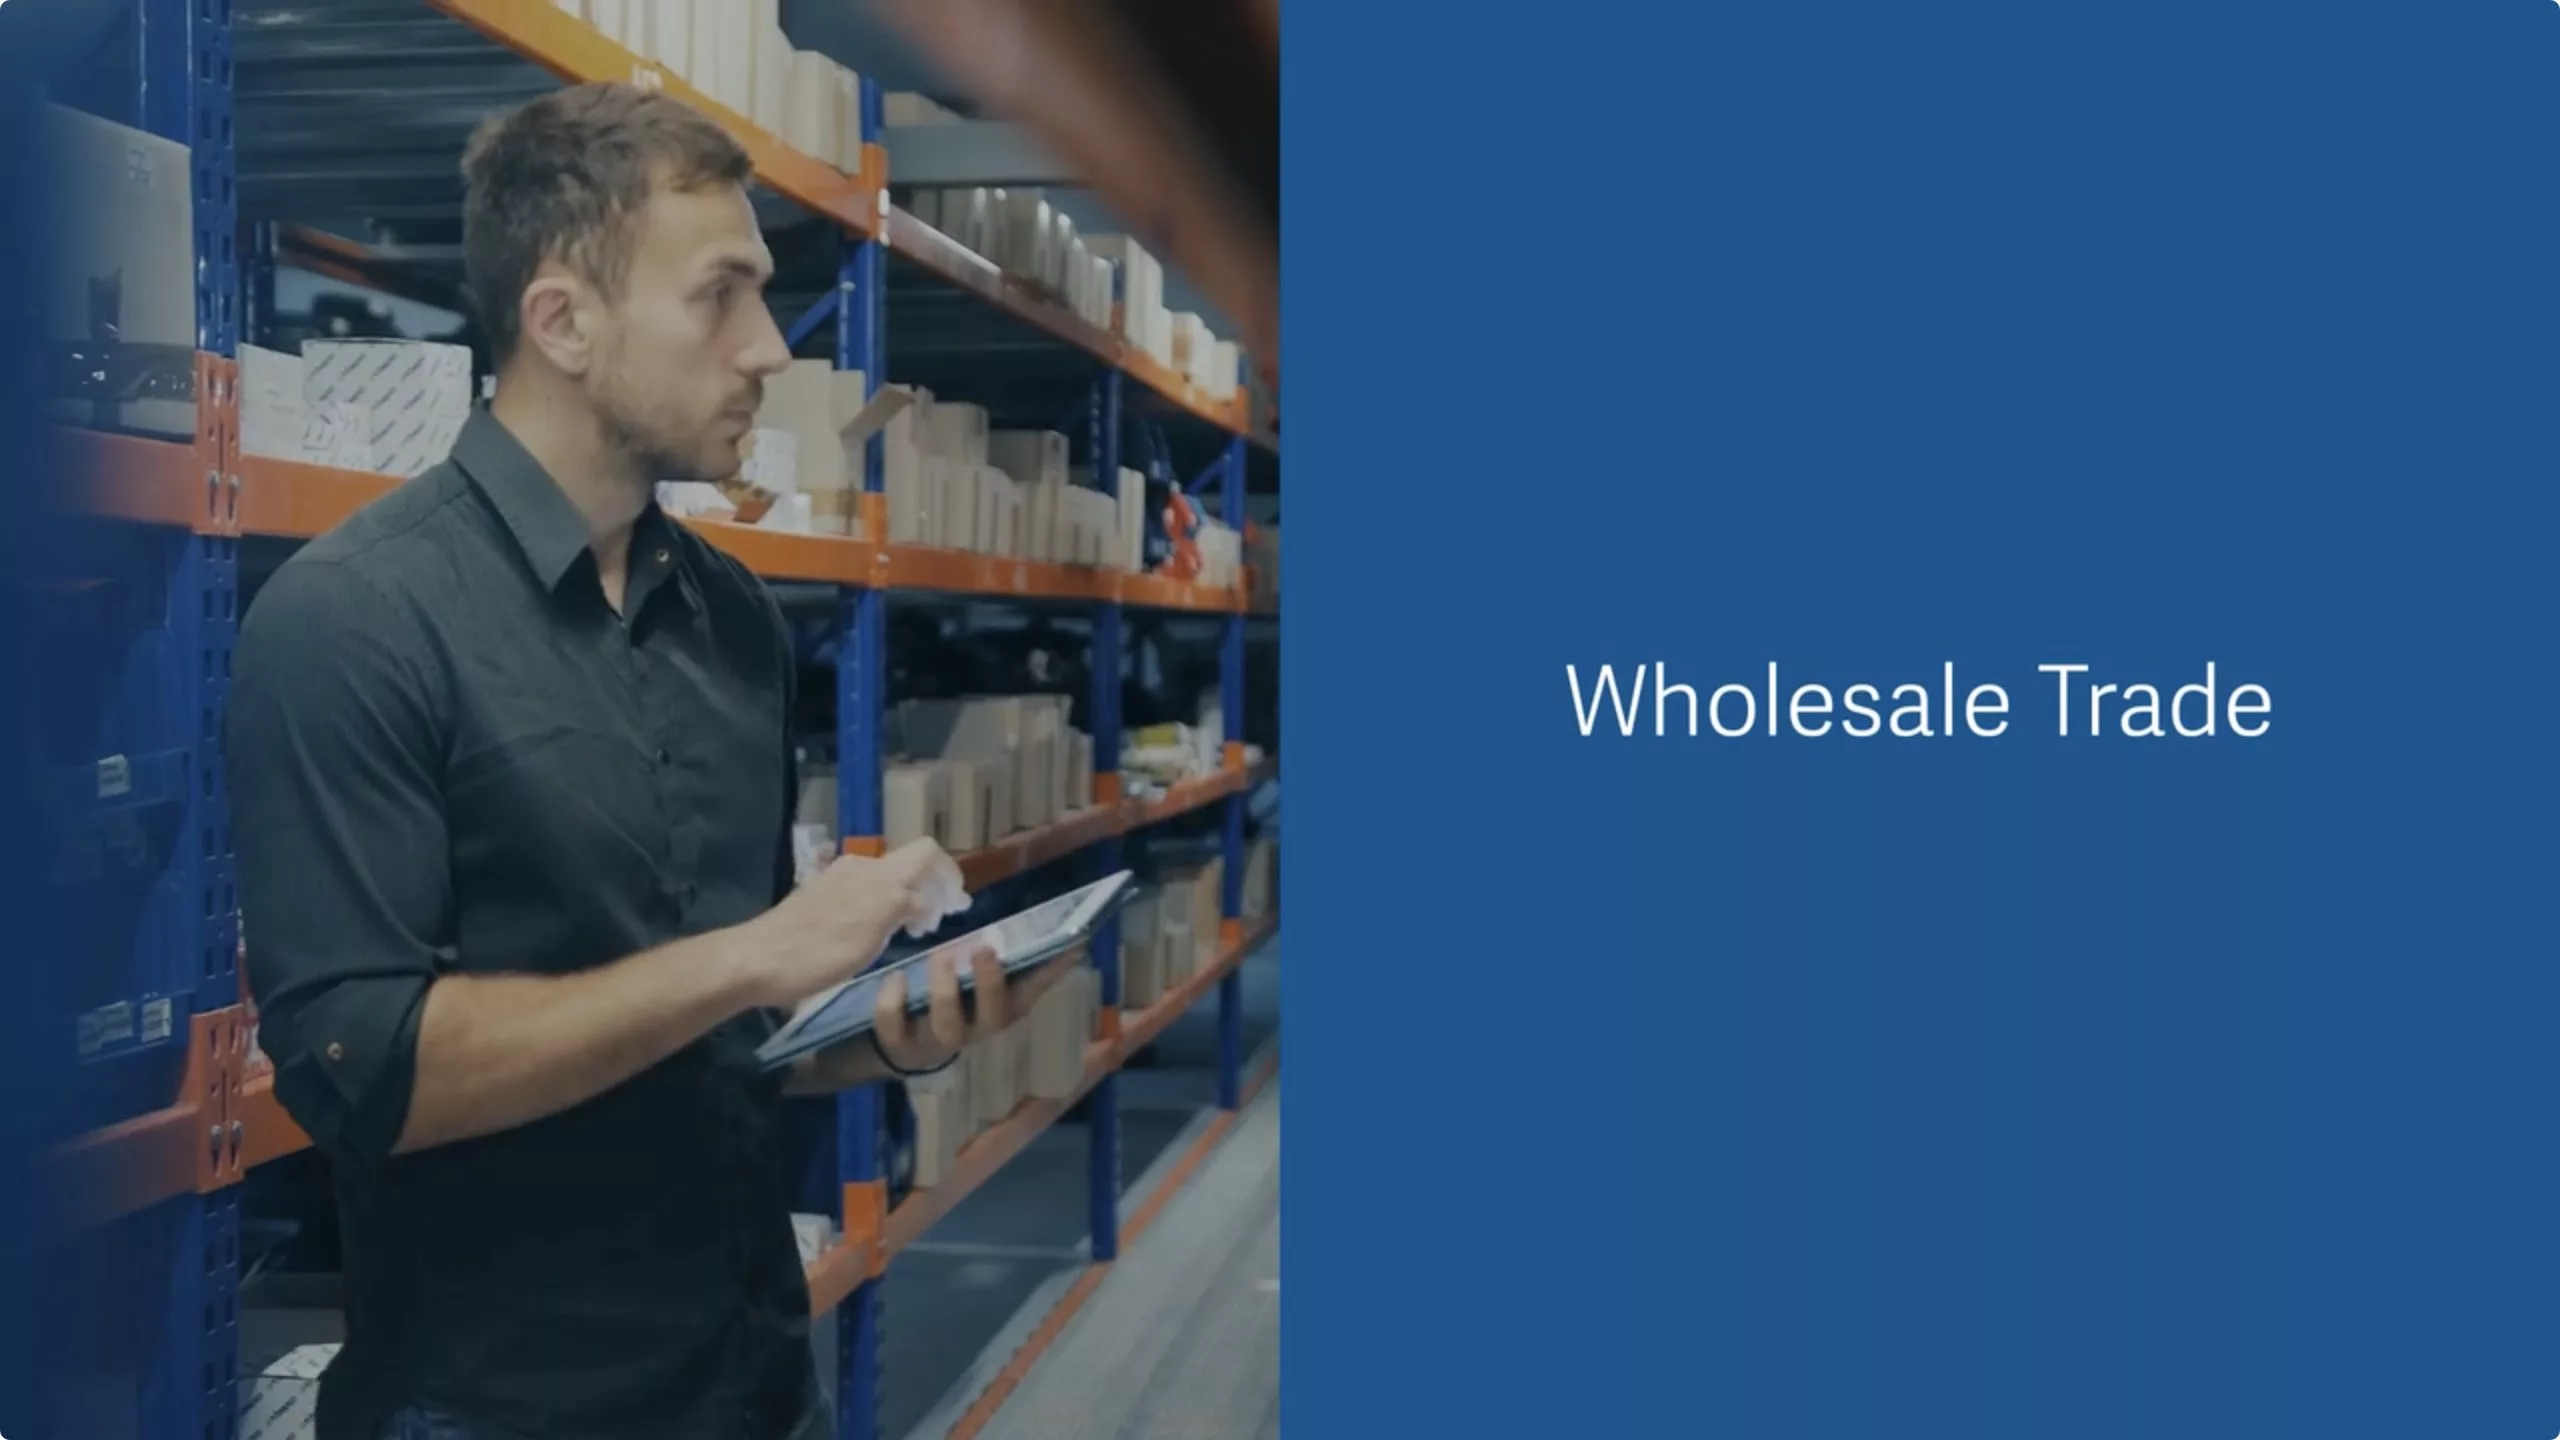 Wholesale introduction video image